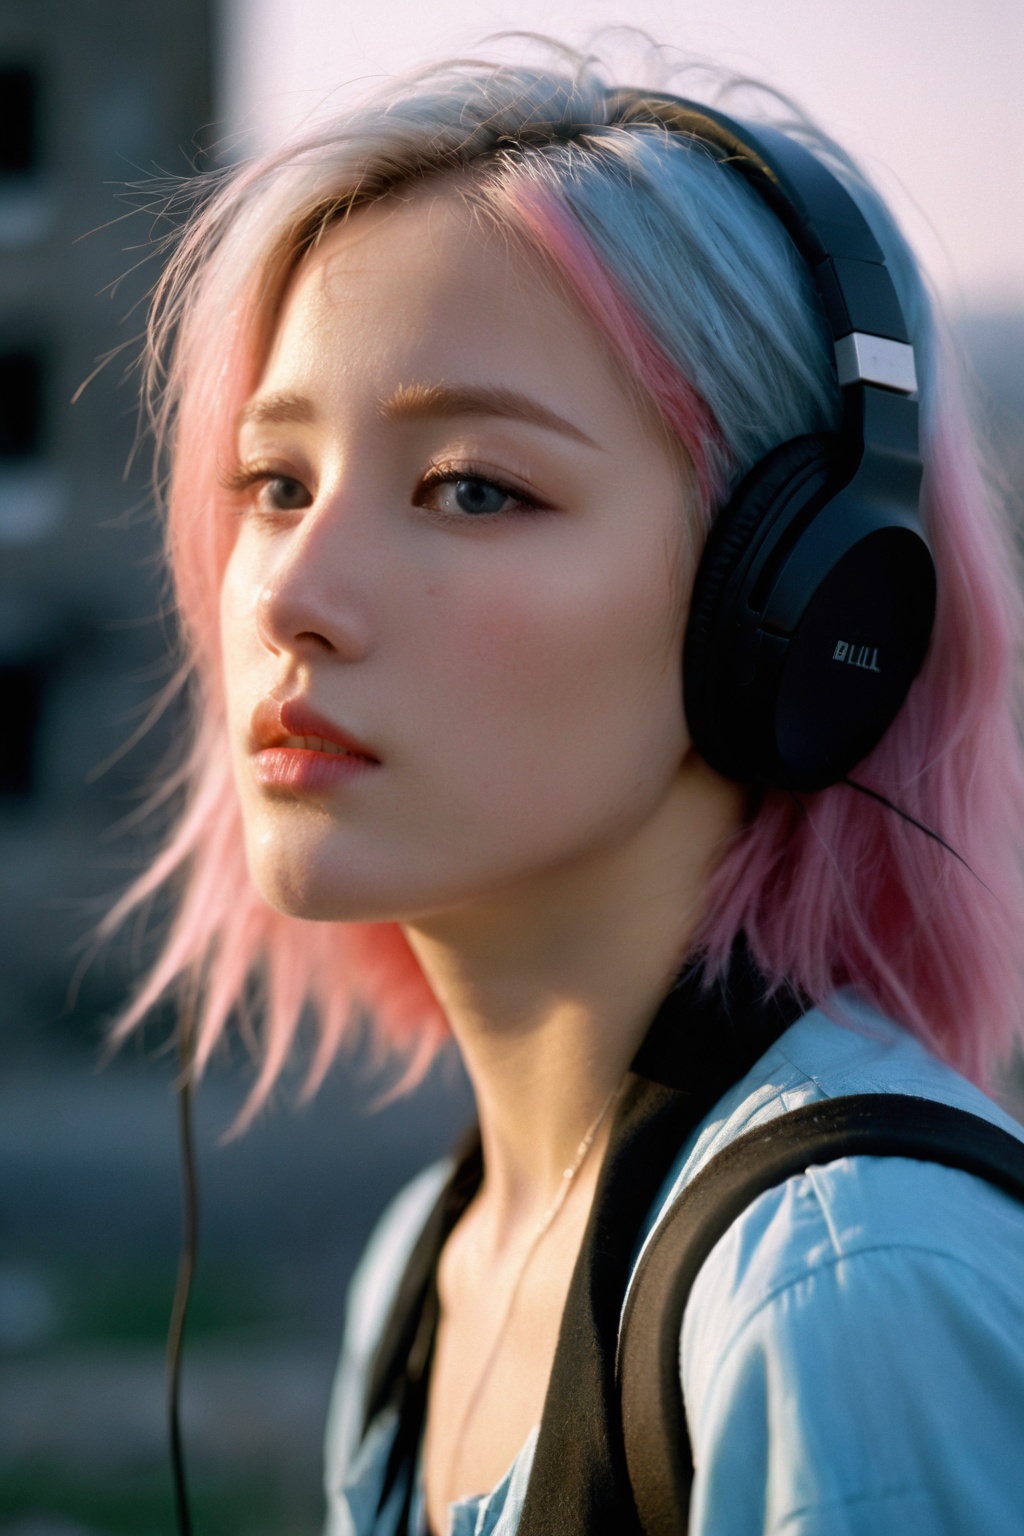 depressed,portrait of 1girl by Bill Henson,depressed,ruins,shadows,dramatic lighting,sunset,contemporary,dark,expressionism,dystopia,industrial,(sliver hair:1.1),(light blue hair:1.1),(pink hair:1.2),(close_up:1.4),headphone,(ruined city:1.4),